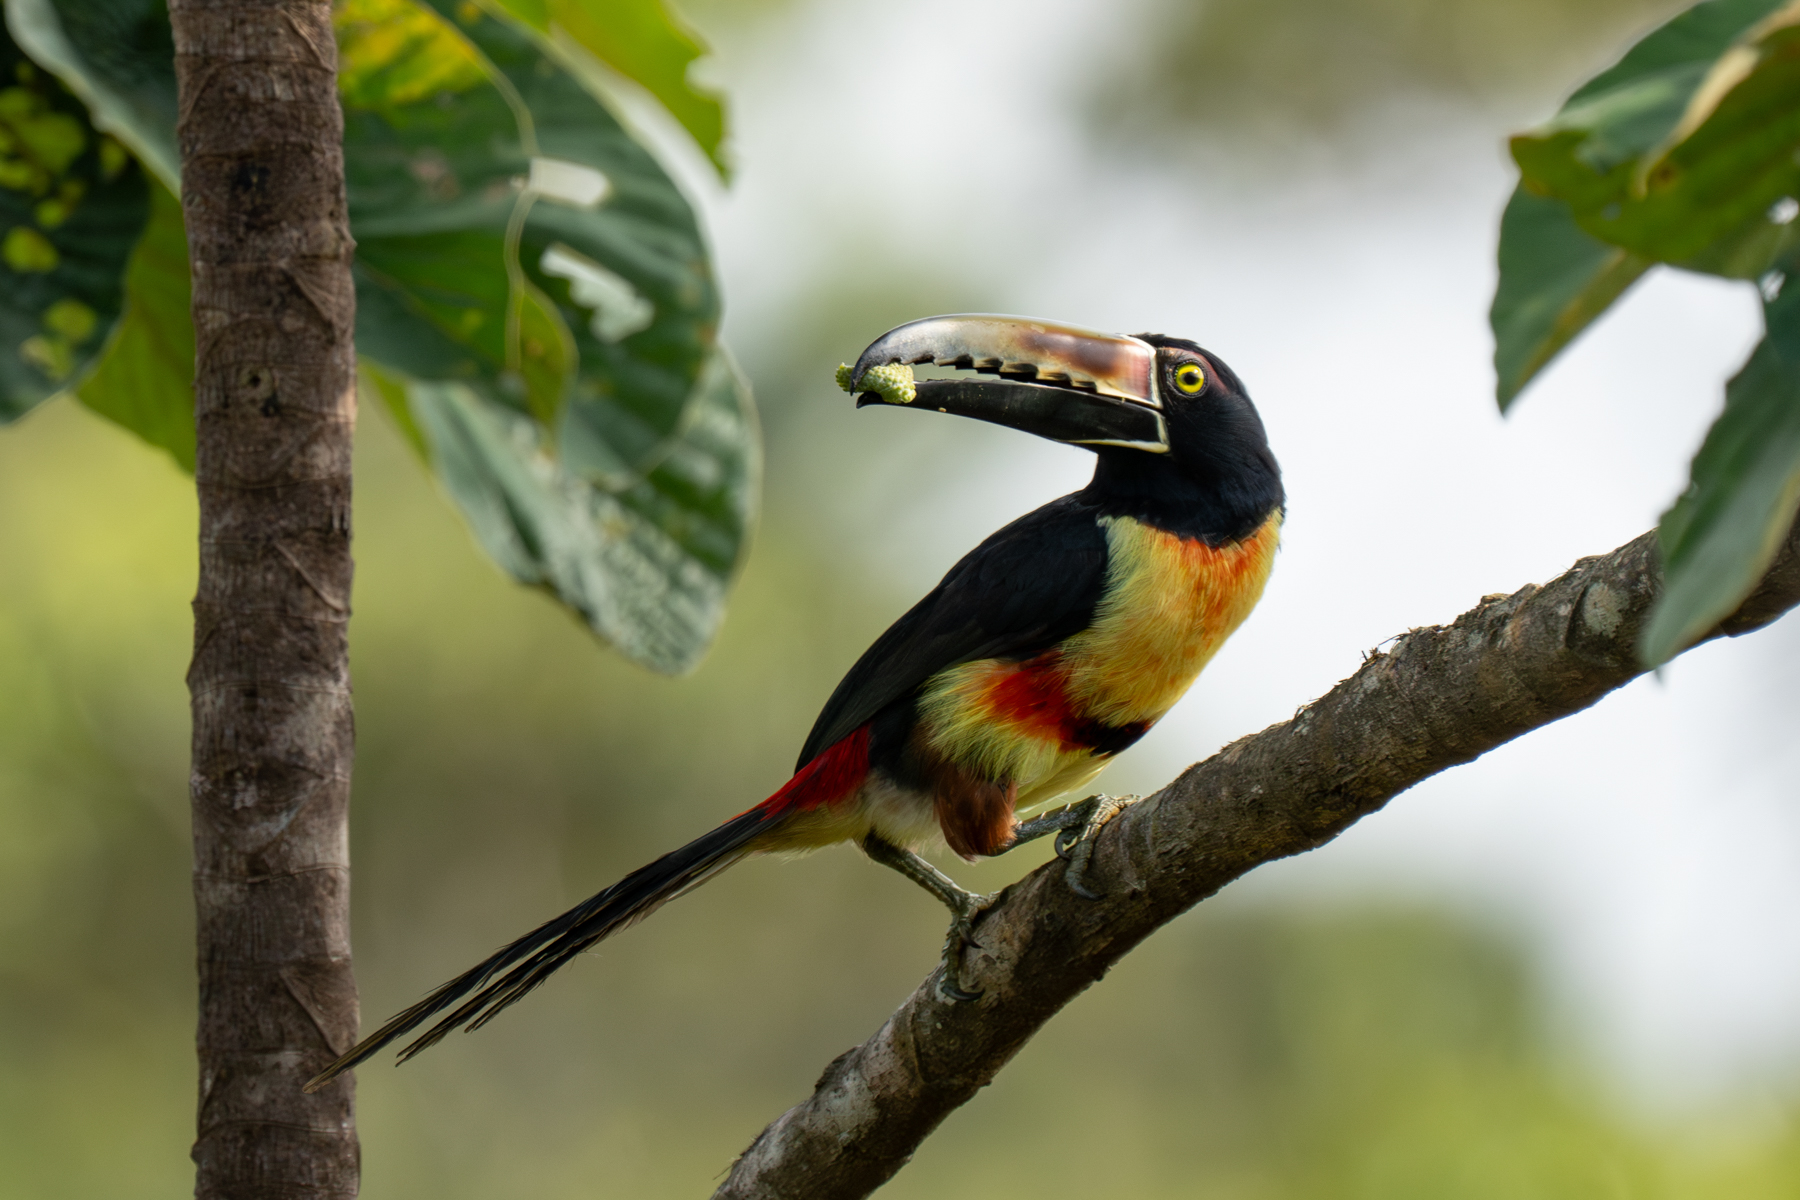 A cheeky Collared Aracari with his fruit breakfast (image by Inger Vandyke)